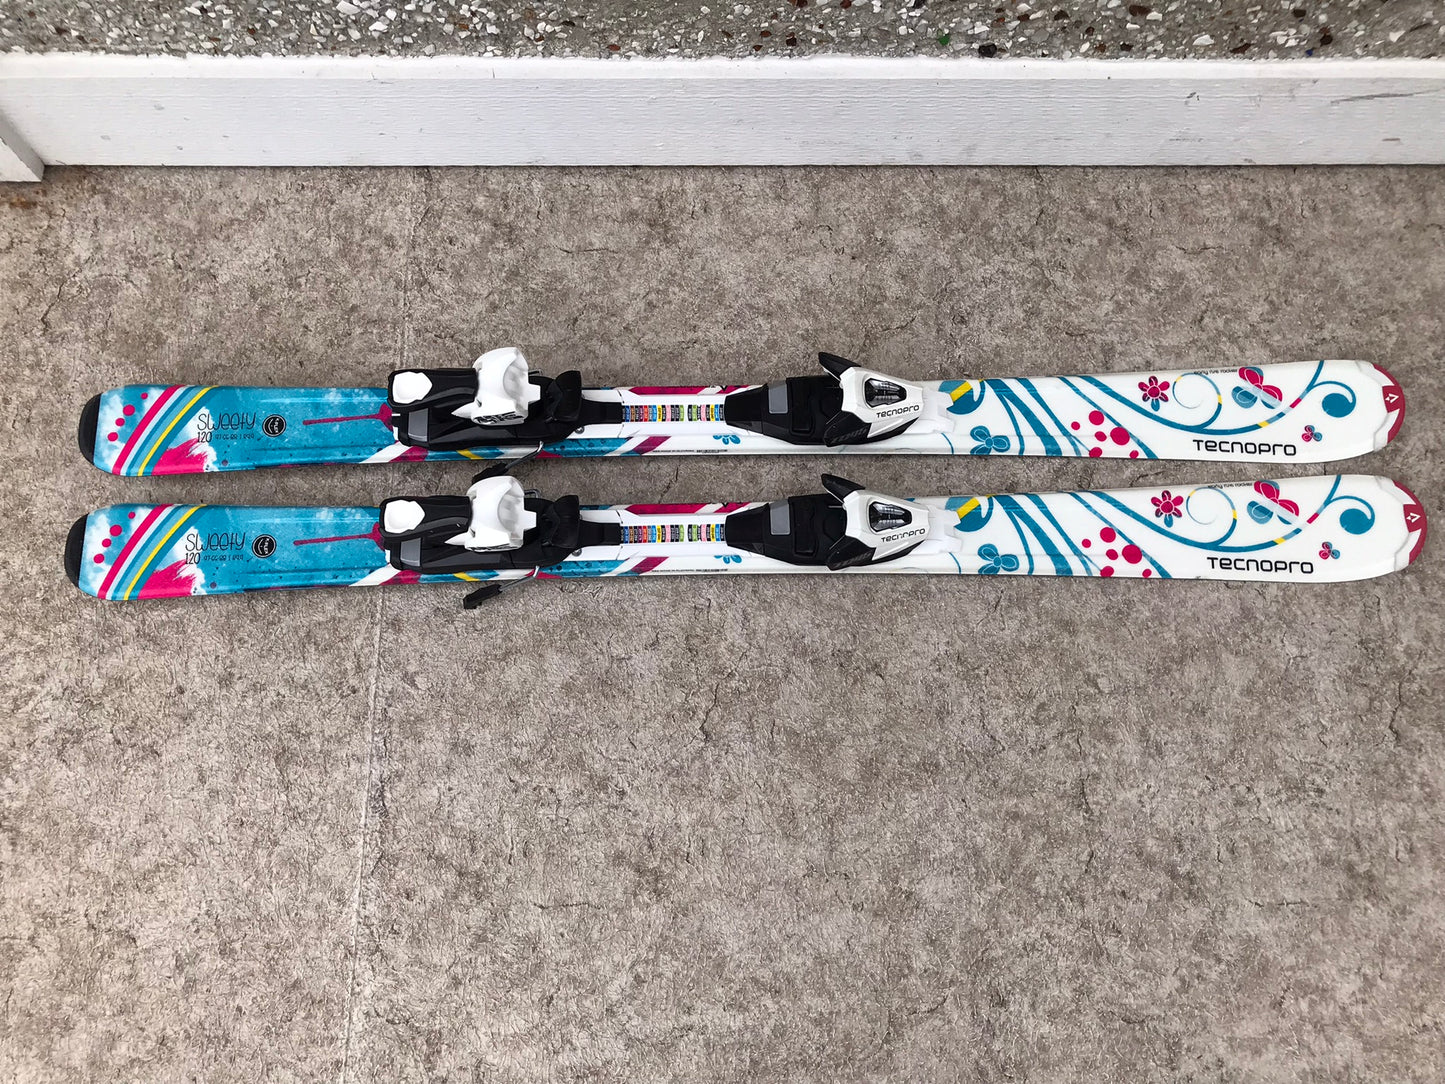 Ski 120 Techo Pro Sweety Parabolic White Teal Pink With Bindings Excellent No